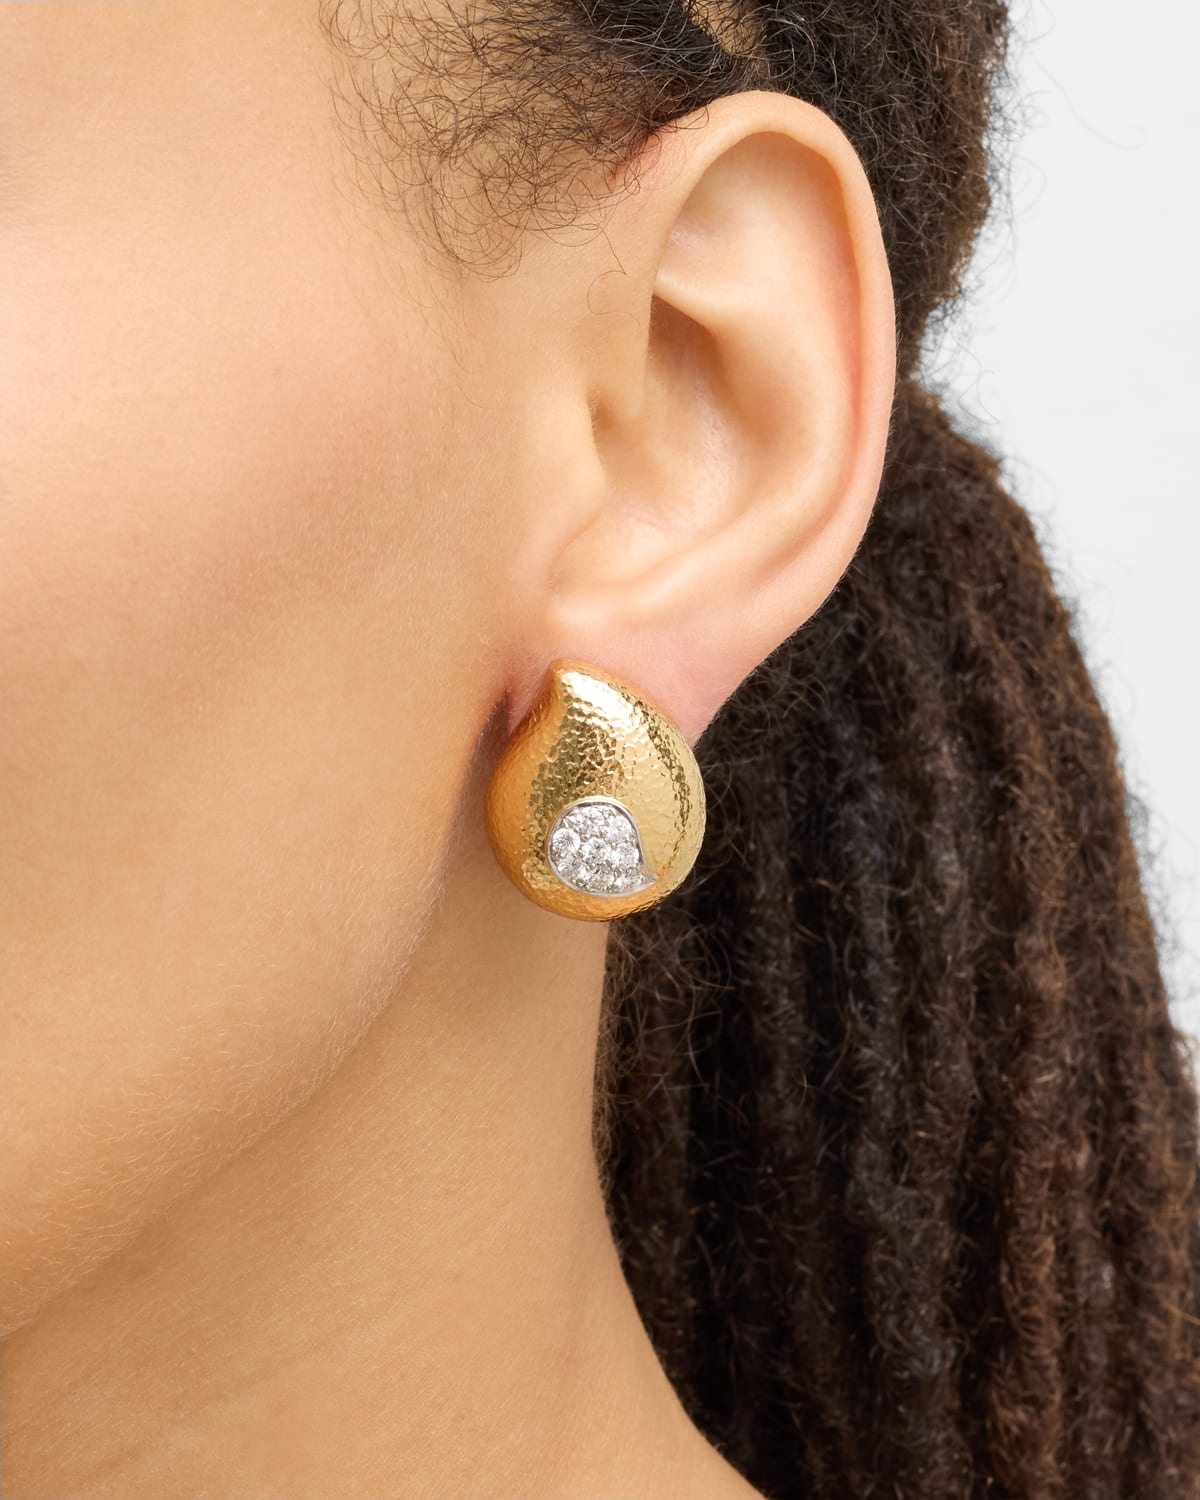 18K Yellow Gold and Platinum Paisley Earrings with Diamonds - 2